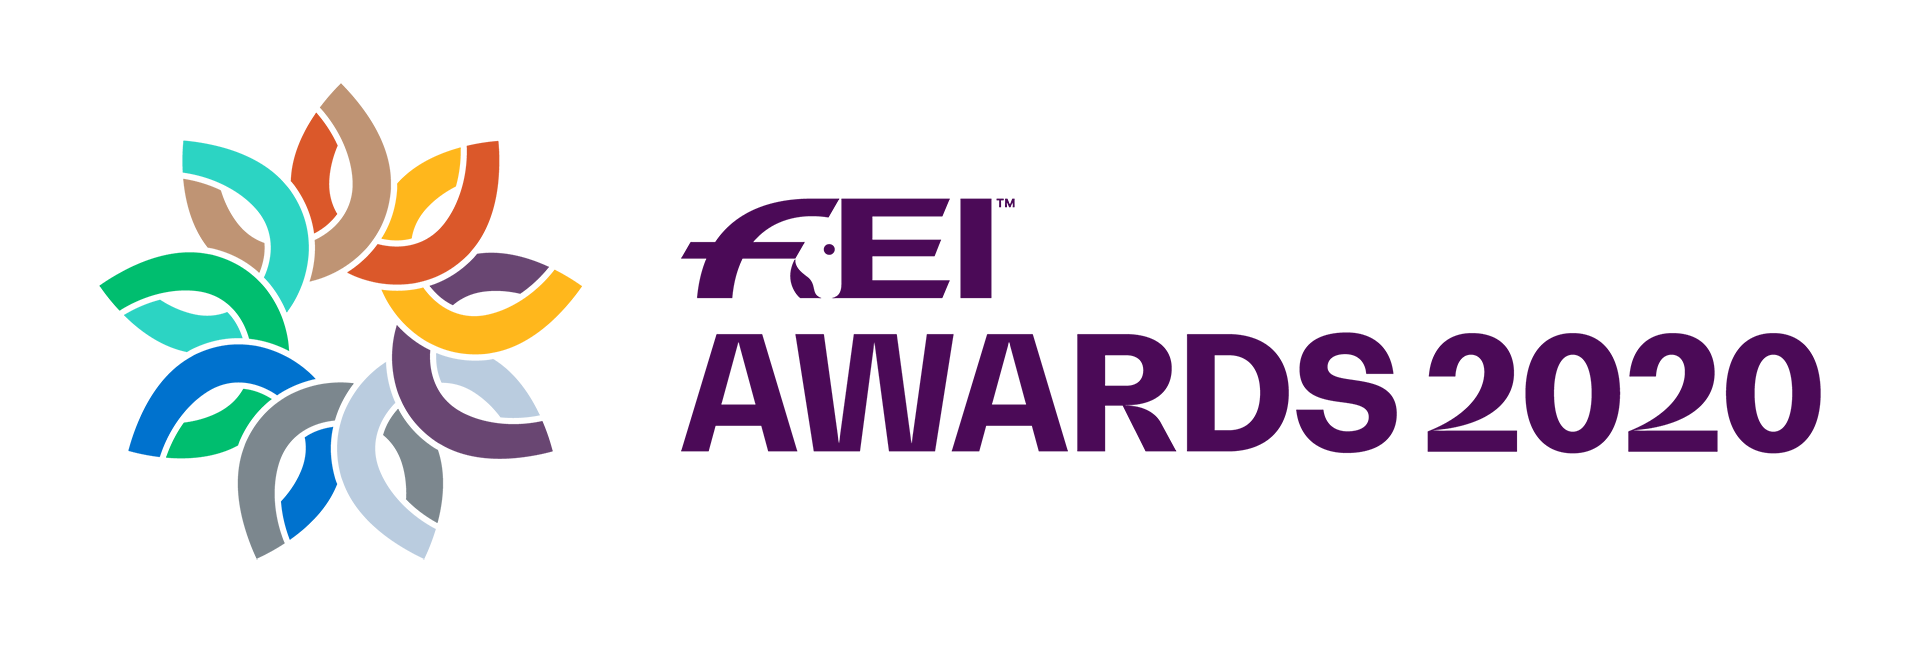 FEI Awards to celebrate excellence from past decade